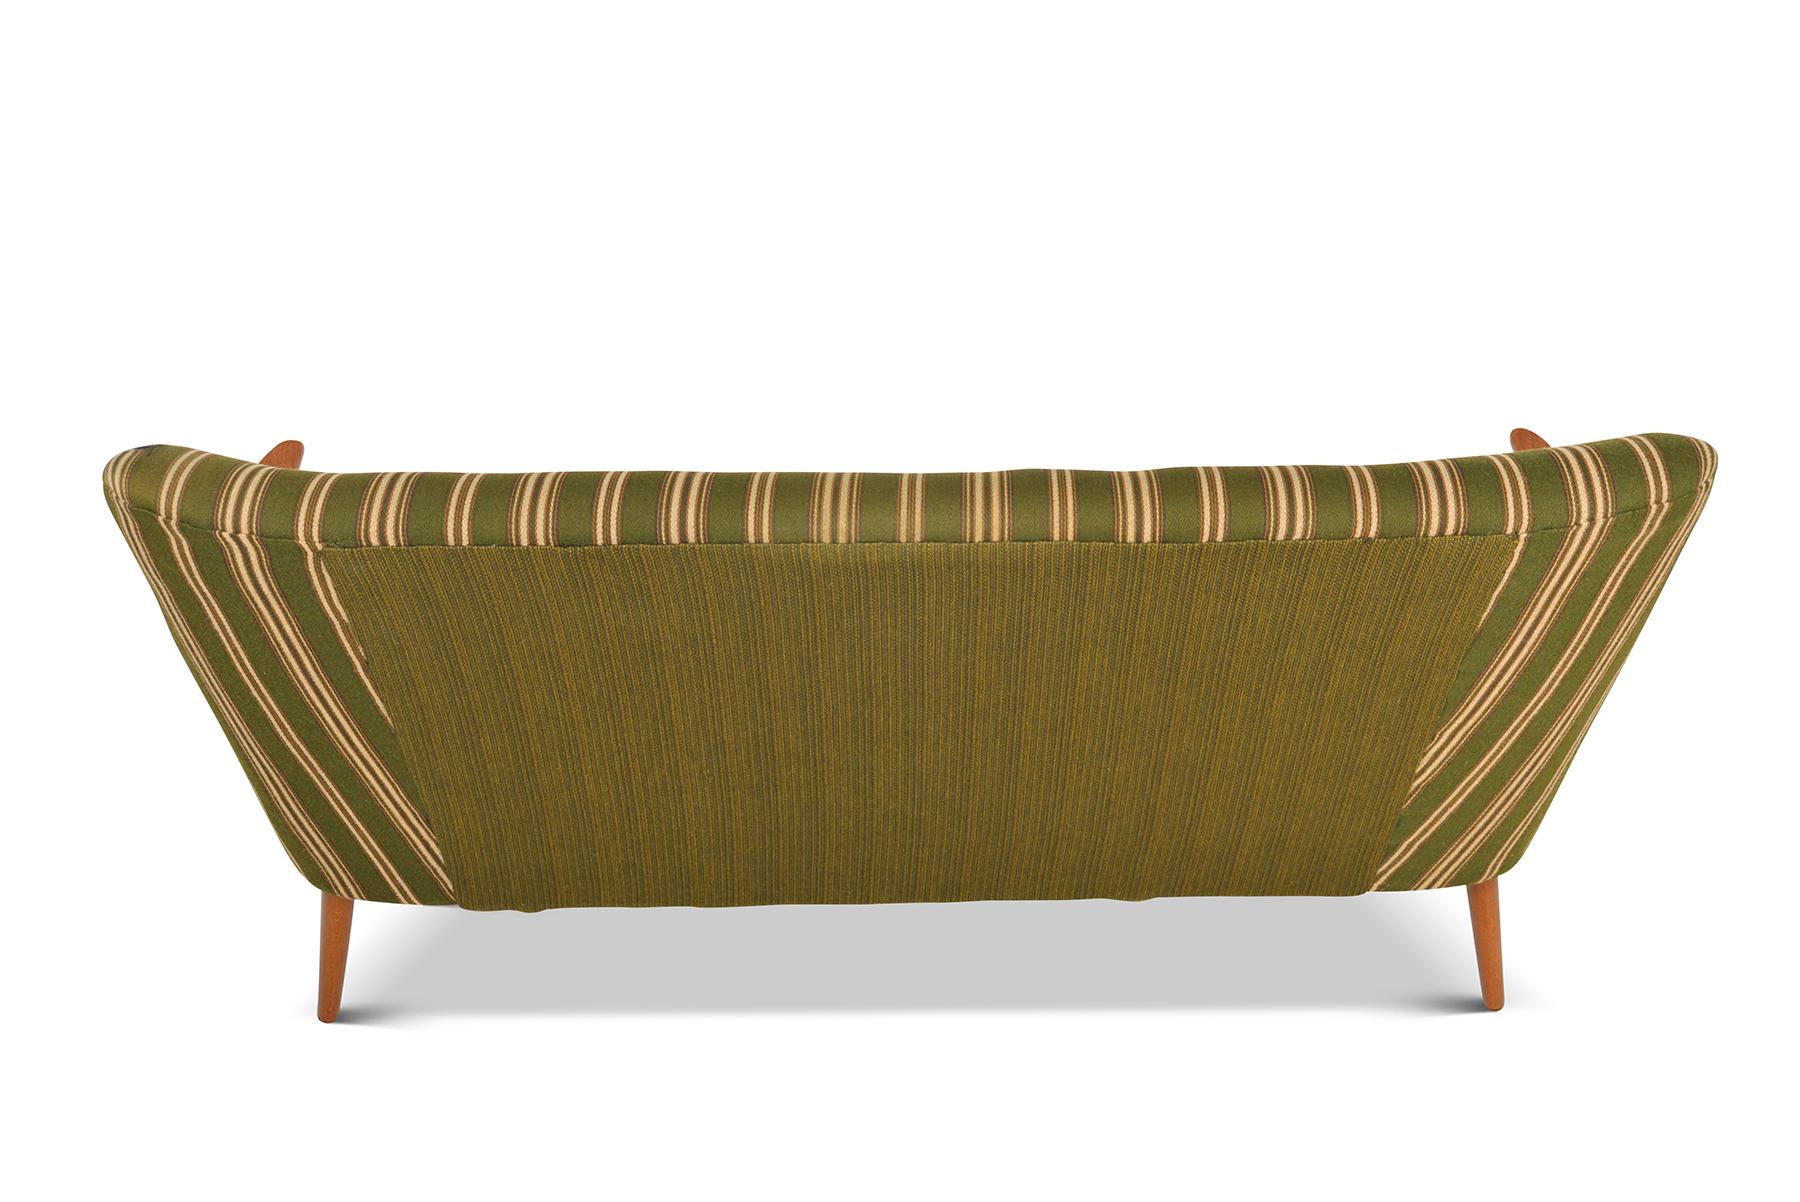 Danish Modern Sofa in Green Striped Wool with Teak Paws In Good Condition For Sale In Berkeley, CA